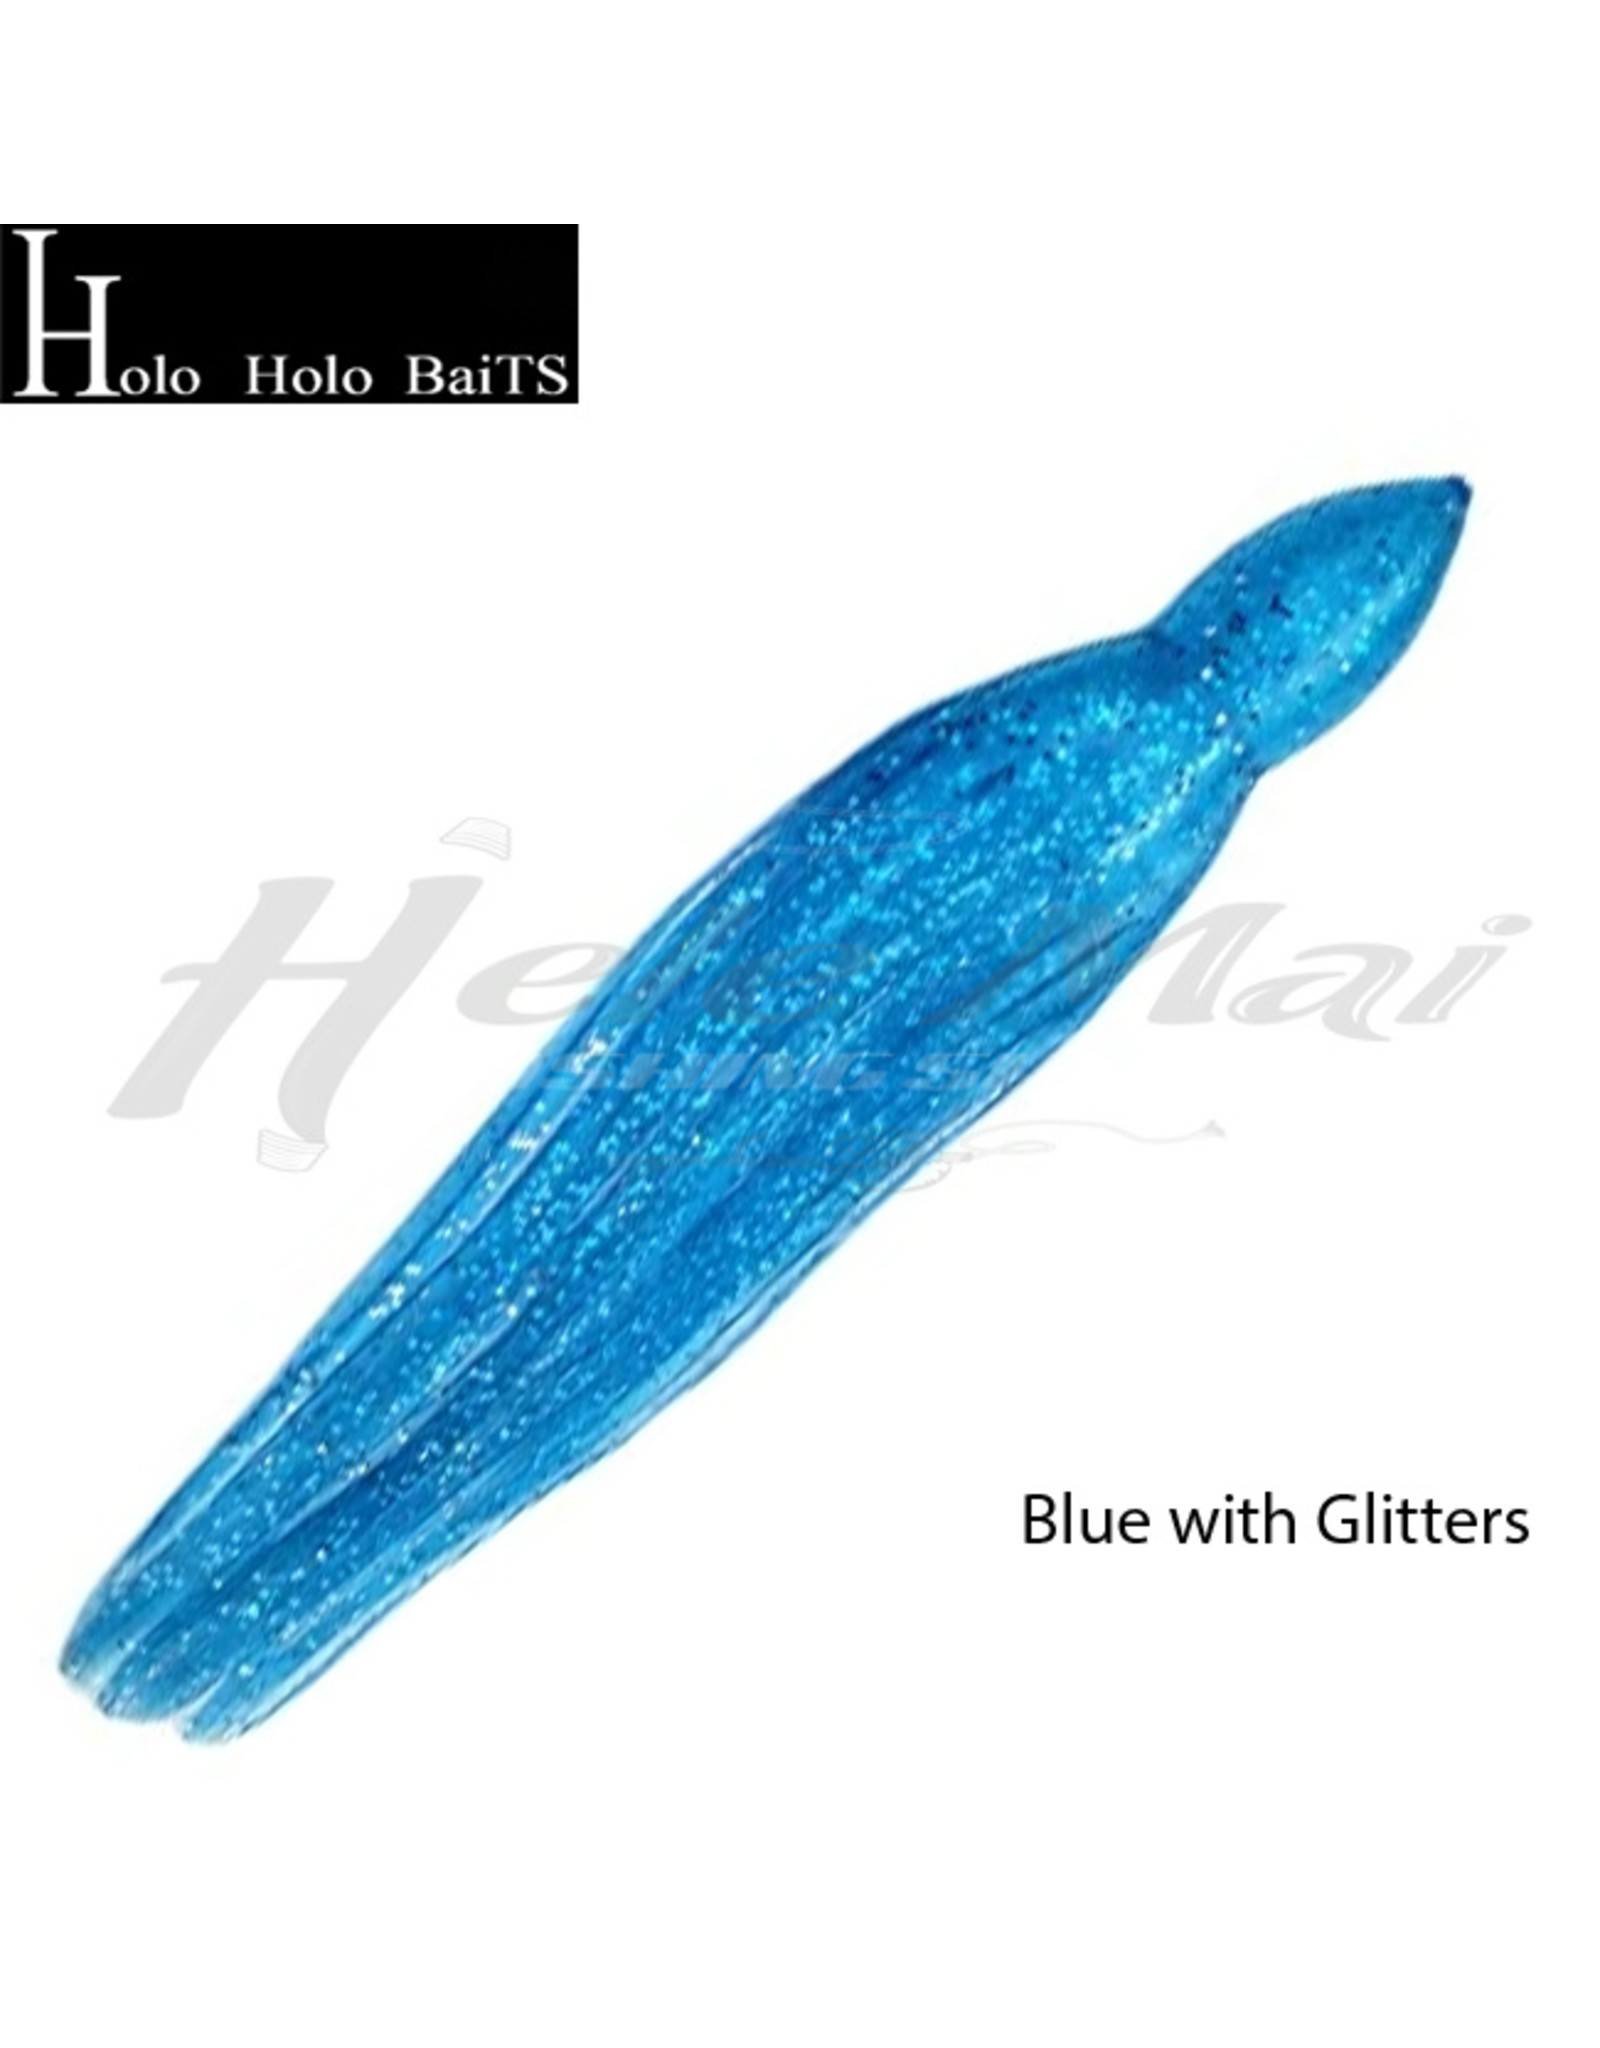 HOLO HOLO HAWAII (HHH) HH, 7" SQUID SKIRT ICY BLUE SILVER GLITTER 0630